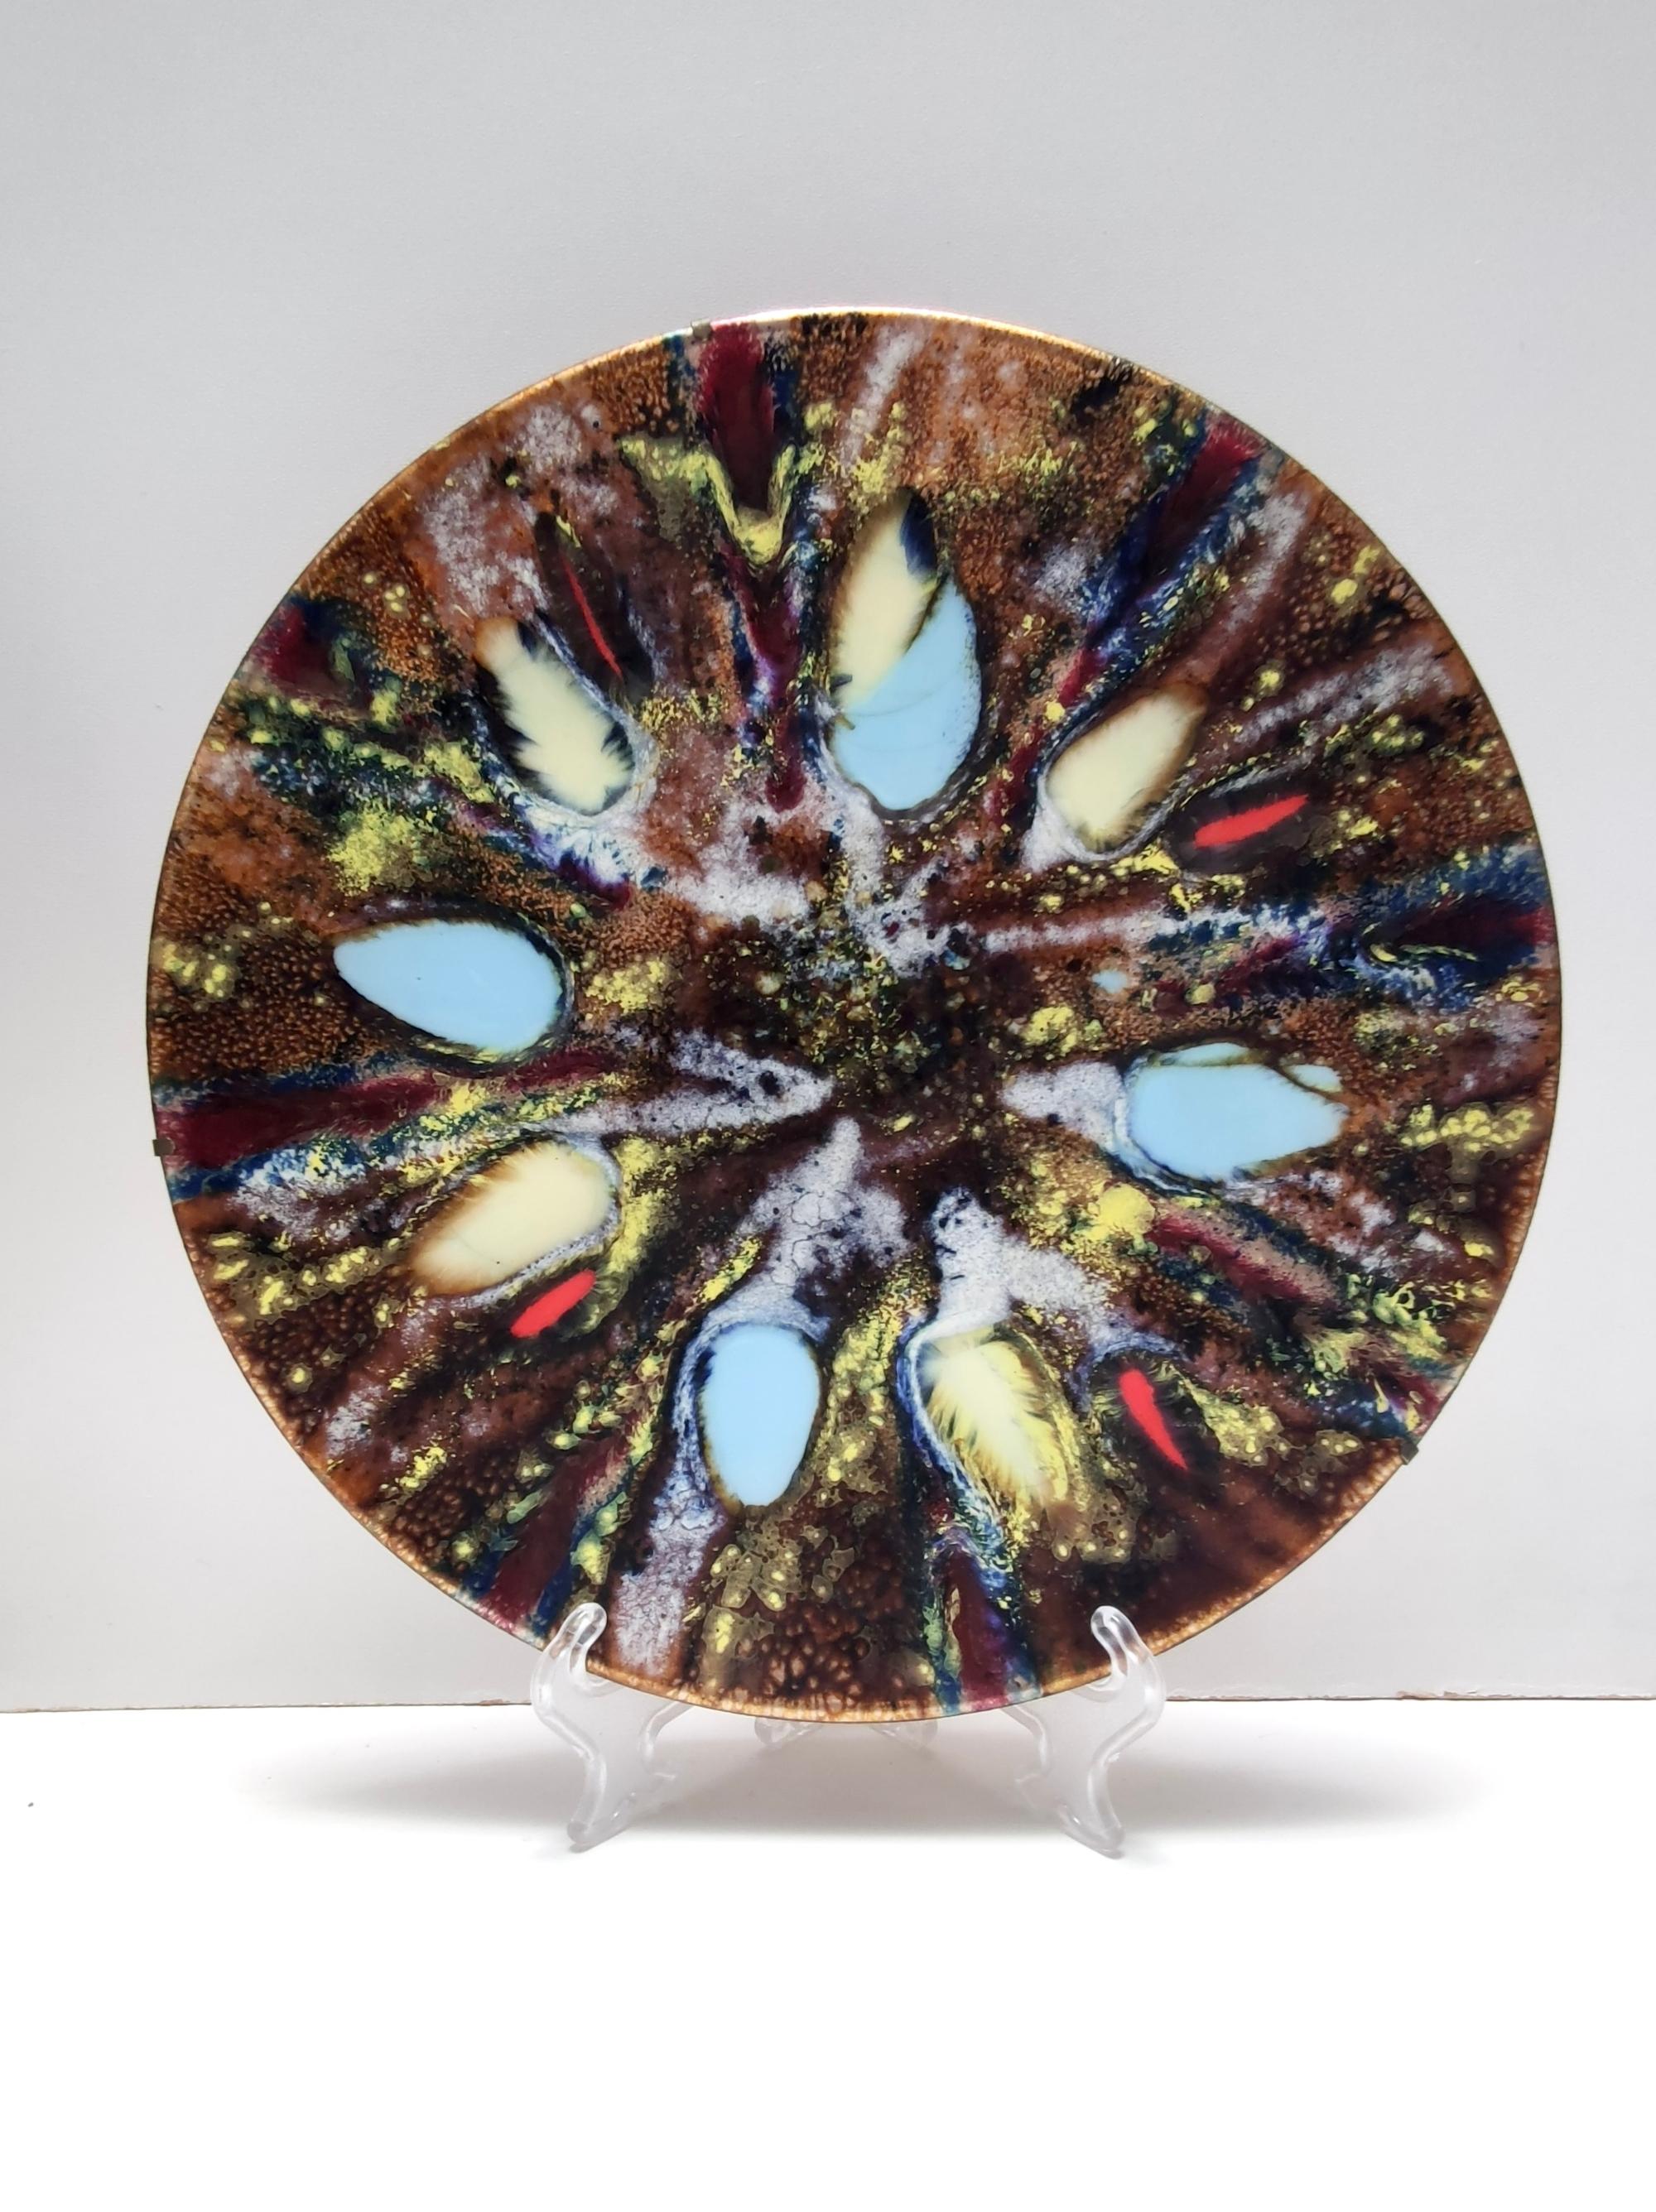 Made in Italy, 1950s. 
These catchalls / vide-poches / decorative plates are made in hand-enameled copper and features splendid colors.
They are vintage, therefore they might show slight traces of use, but they can be considered as in very good